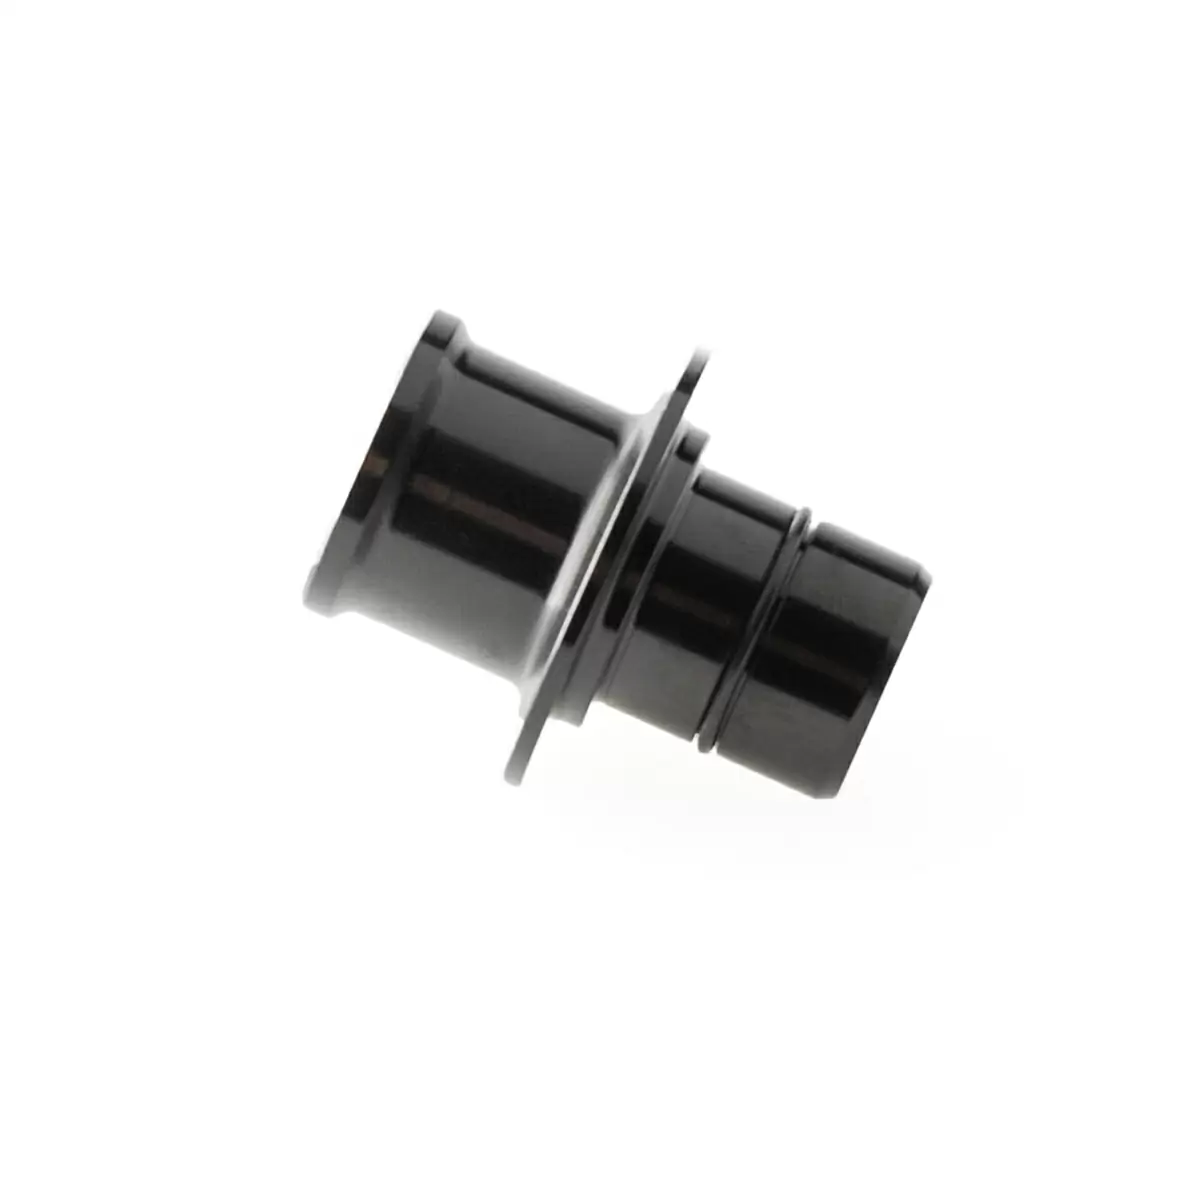 Front Hub Adapter left side 12x100mm pin for 350 - 370 hubs - image